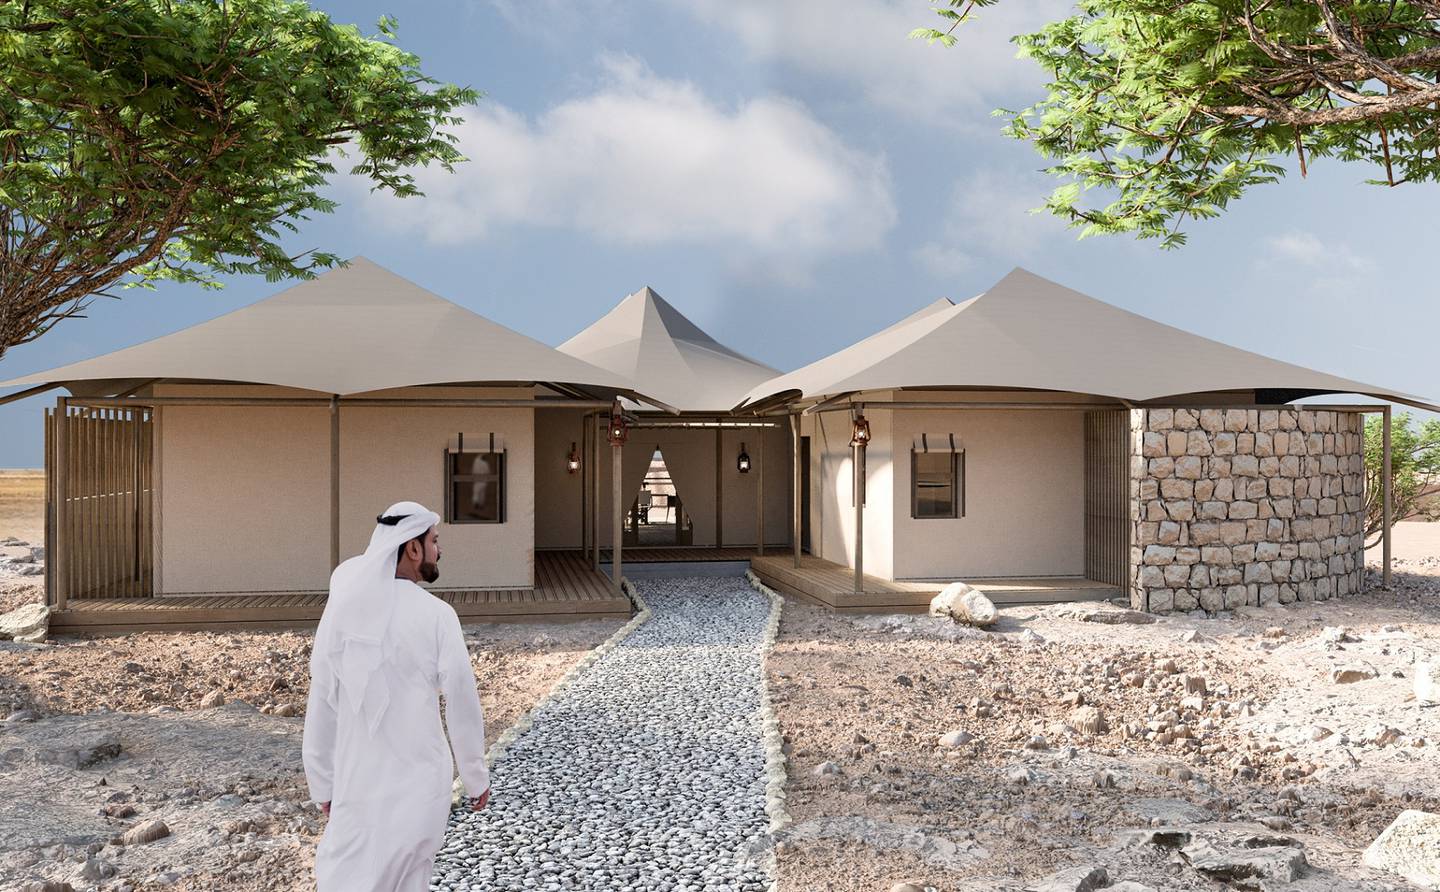 Guests checking into the Lux* Al Bridi Resort will be treated to one of 35 tented retreats. Photo: Shurooq